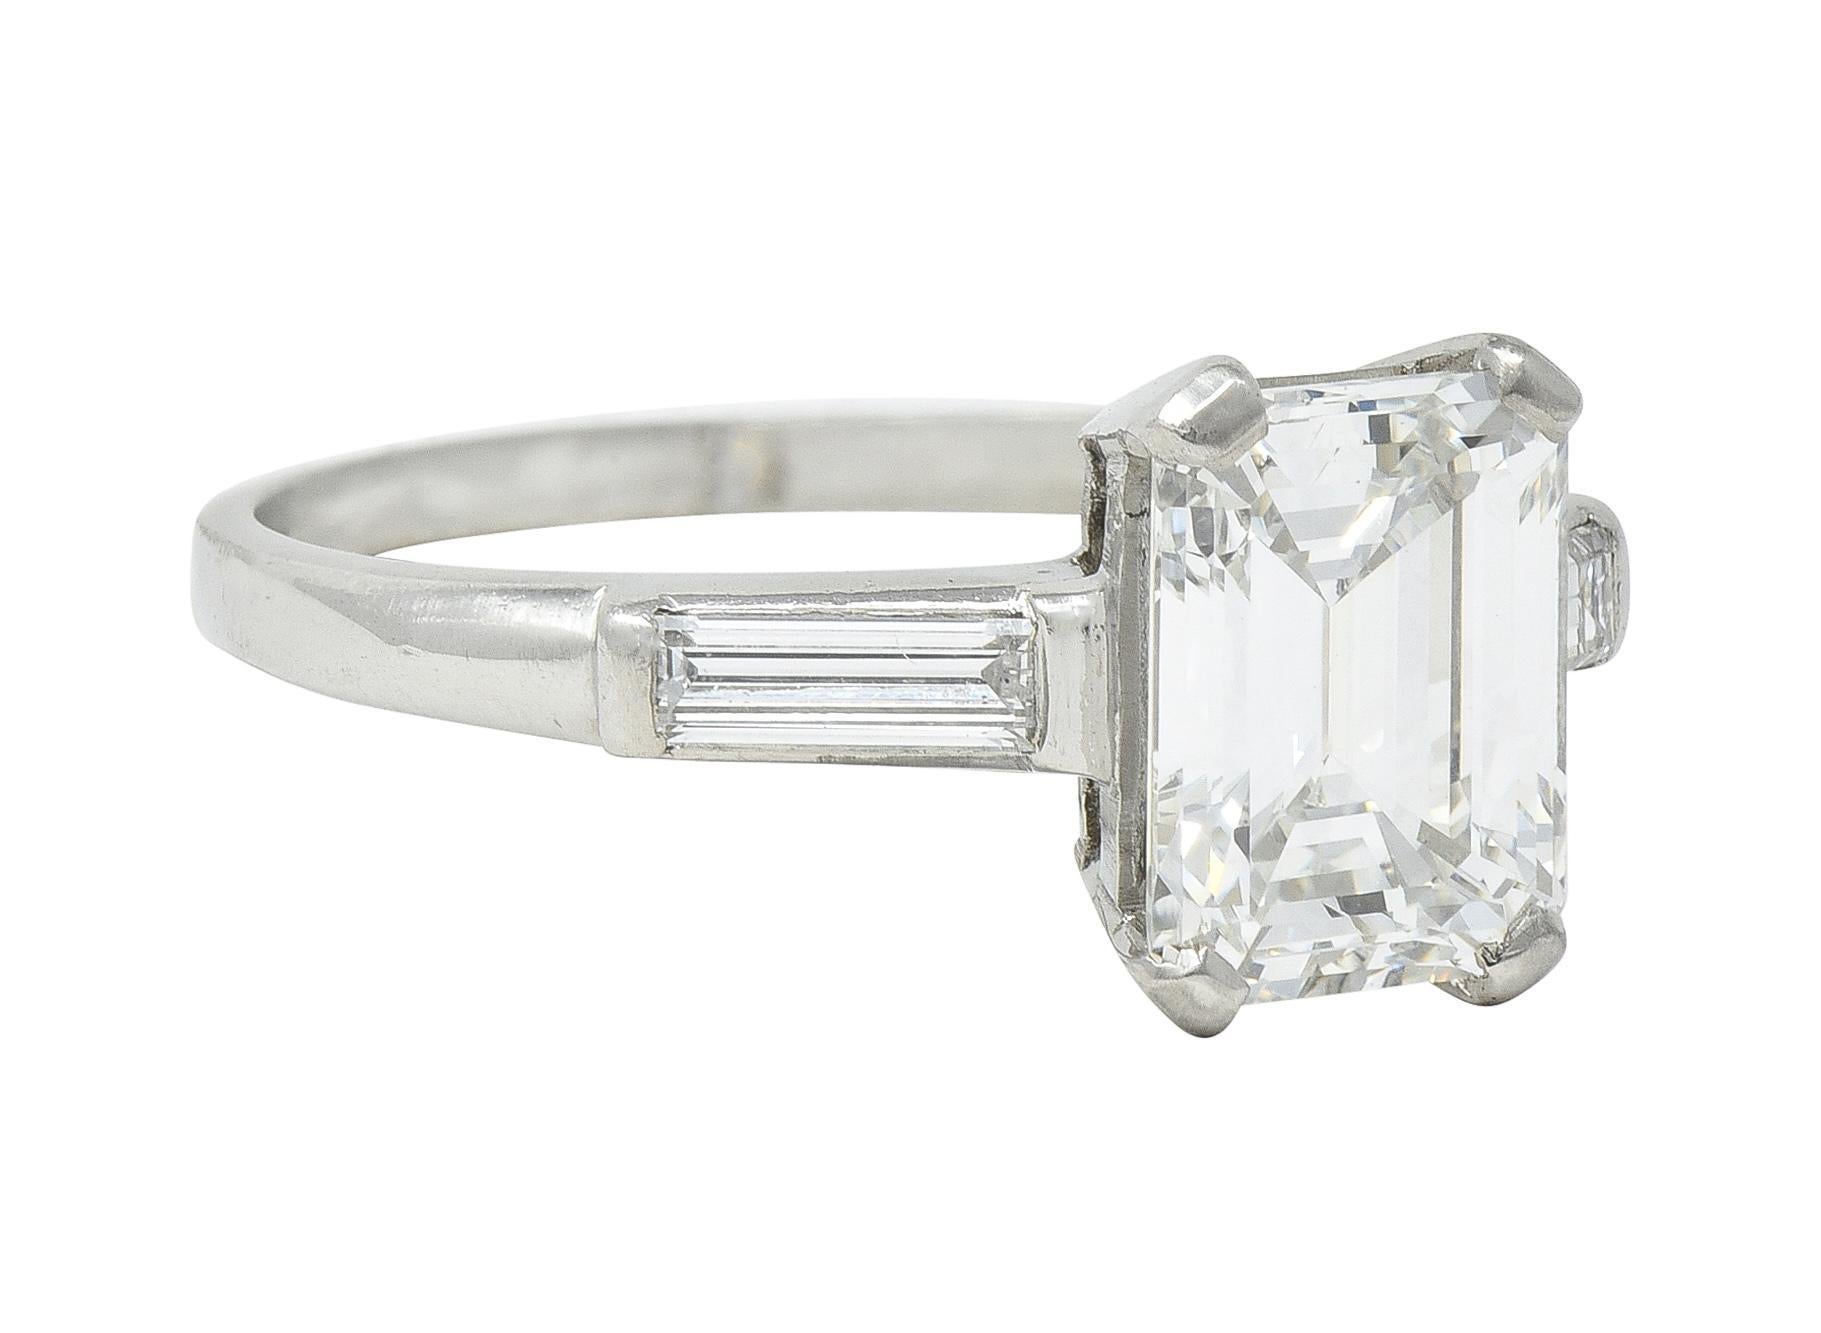 Engagement ring centers a prong set emerald cut diamond weighing 1.83 carats - F color with VS2 clarity
Flanked by two bar set and well matched baguette cut diamonds - weighing approximately 0.28 carat total
Completed by high polished shank
Stamped